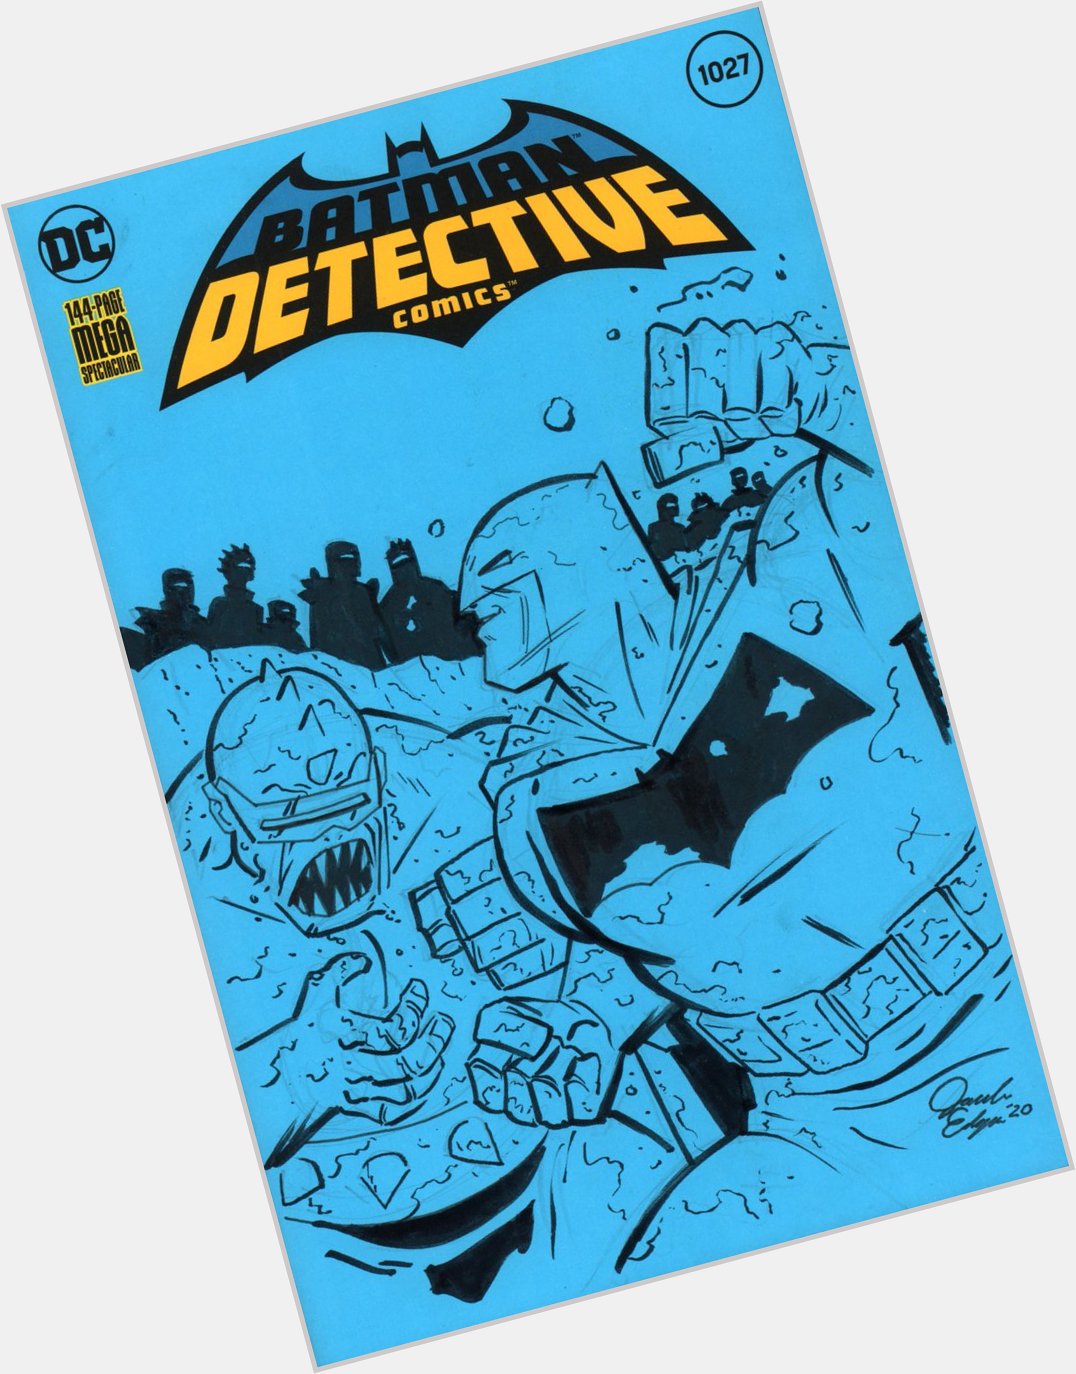 Happy Birthday to the great Frank Miller! DKR-inspired sketch cover I did back in 2020 